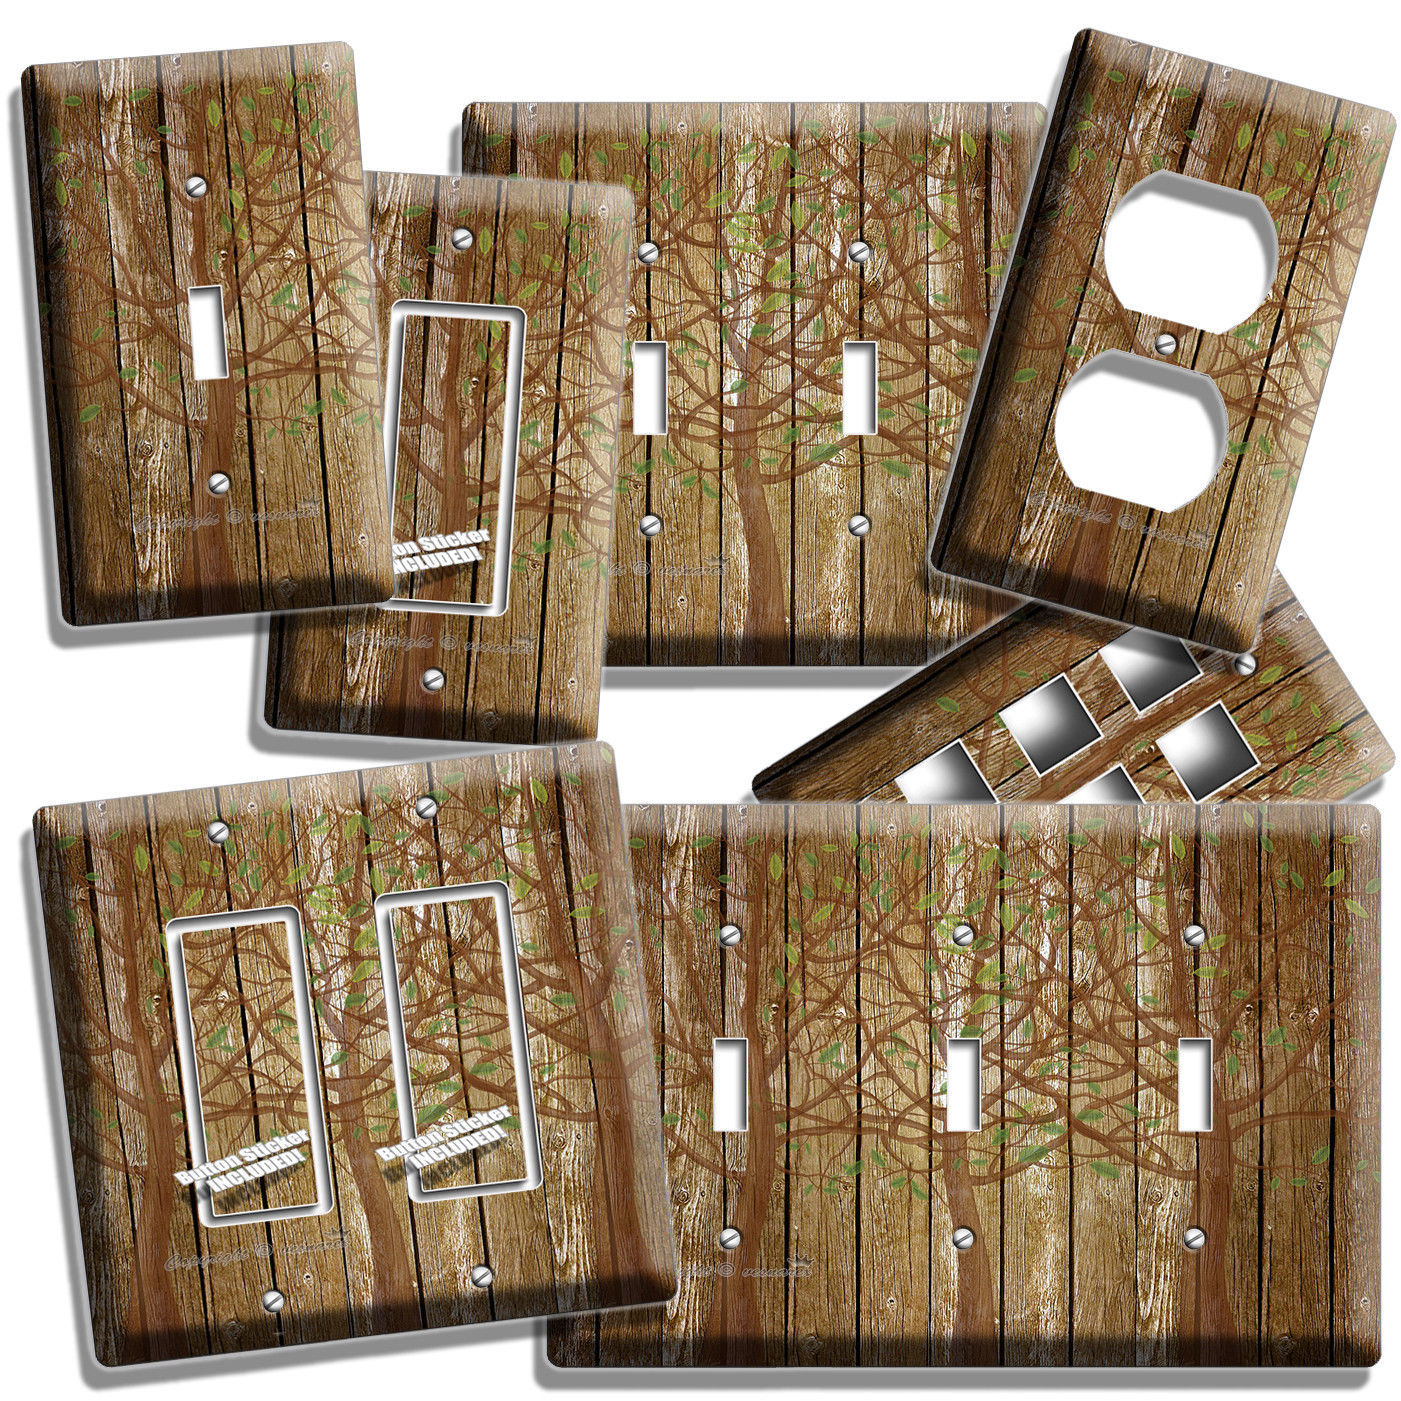 RUSTIC WOOD TREE OF LIFE ANTIQUE DESIGN LIGHT SWITCH OUTLET PLATES BEDROOM DECOR